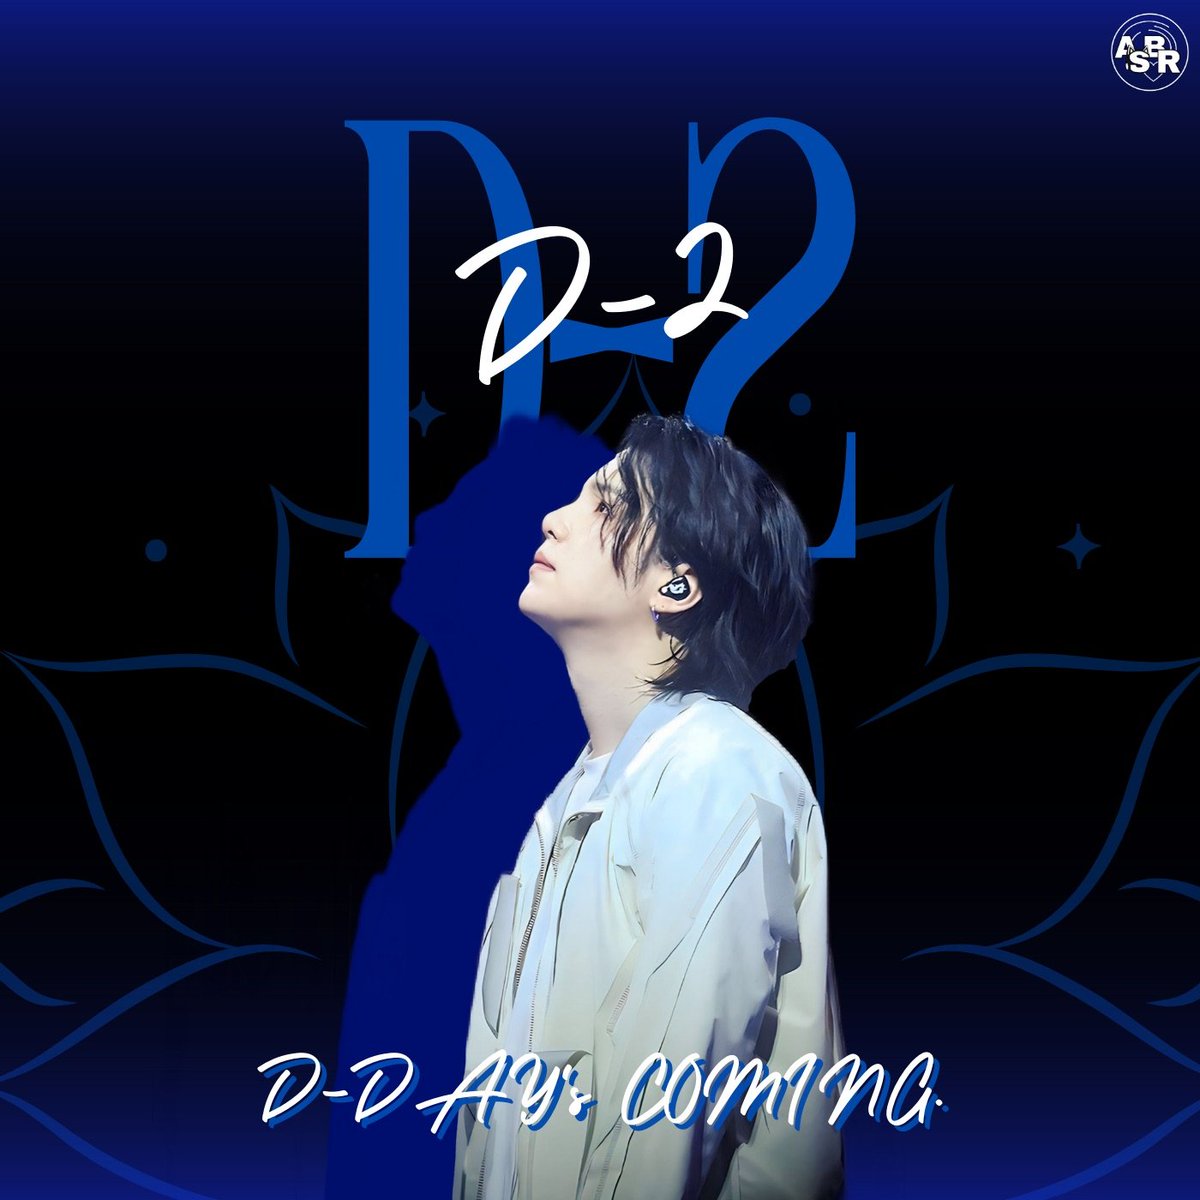 D-DAY'S COMING! #1YearWithDDAY